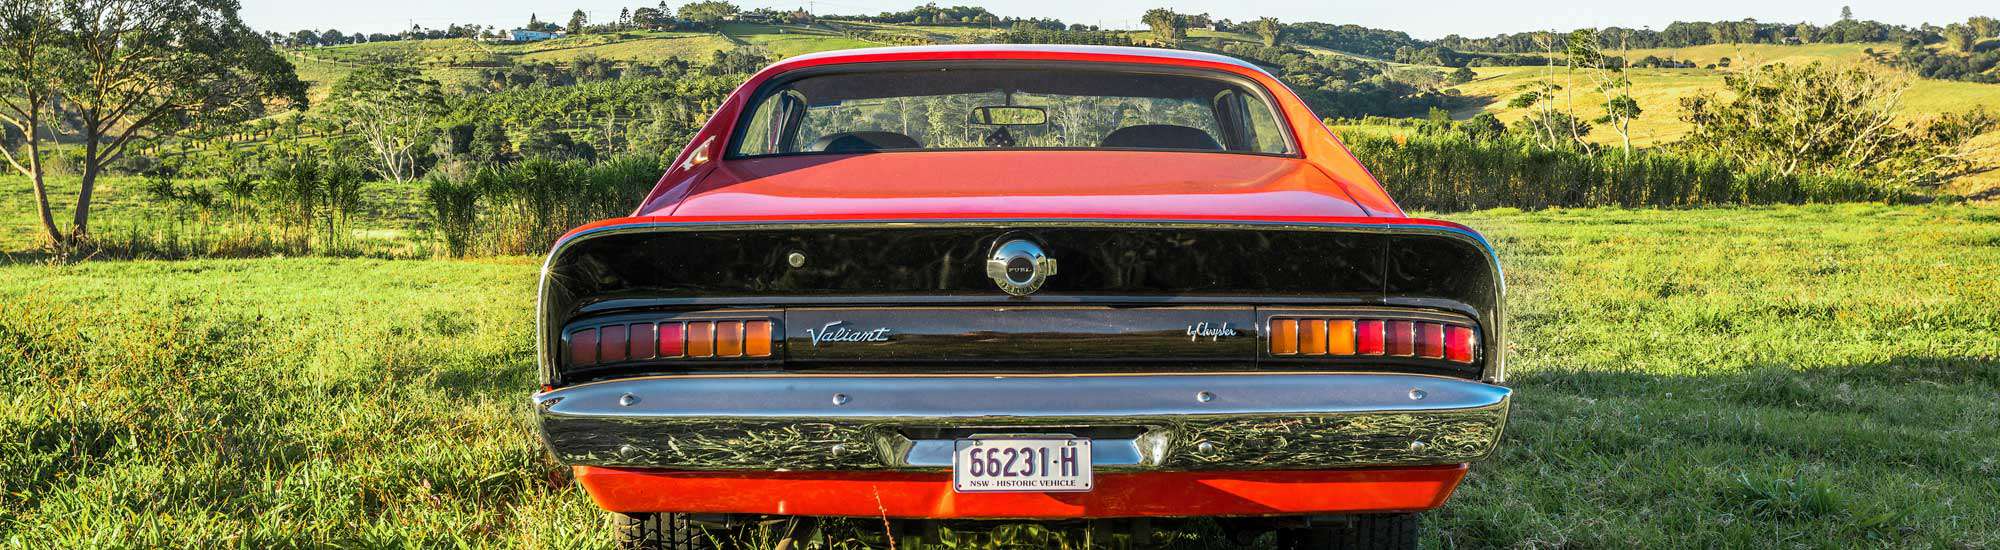 Valiant Charger XL